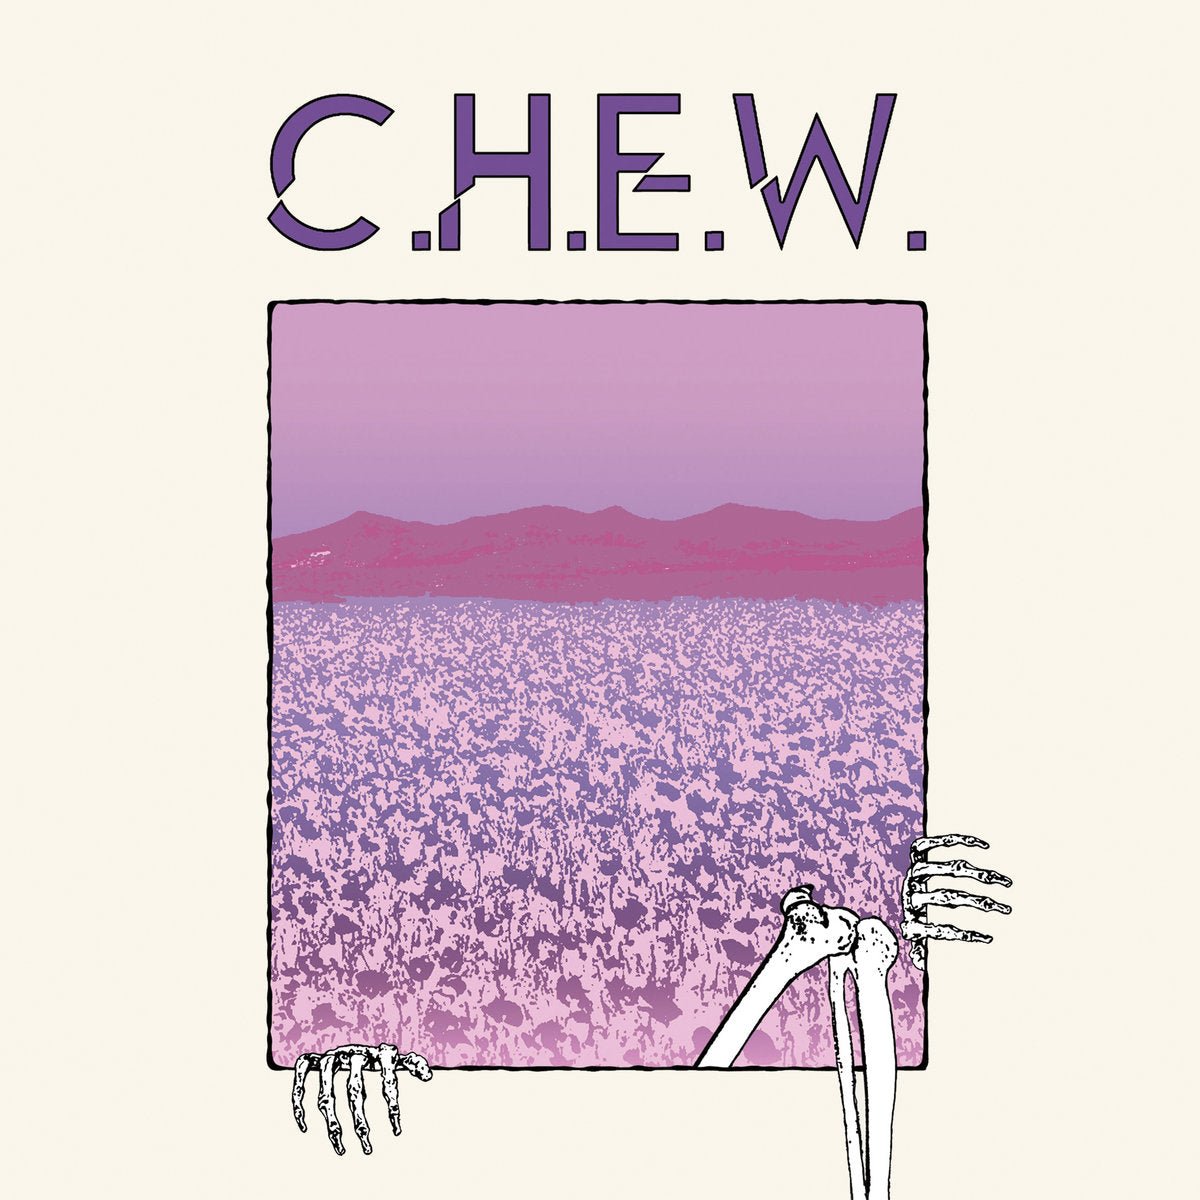 C.H.E.W. - In Due Time 7" - Vinyl - Iron Lung